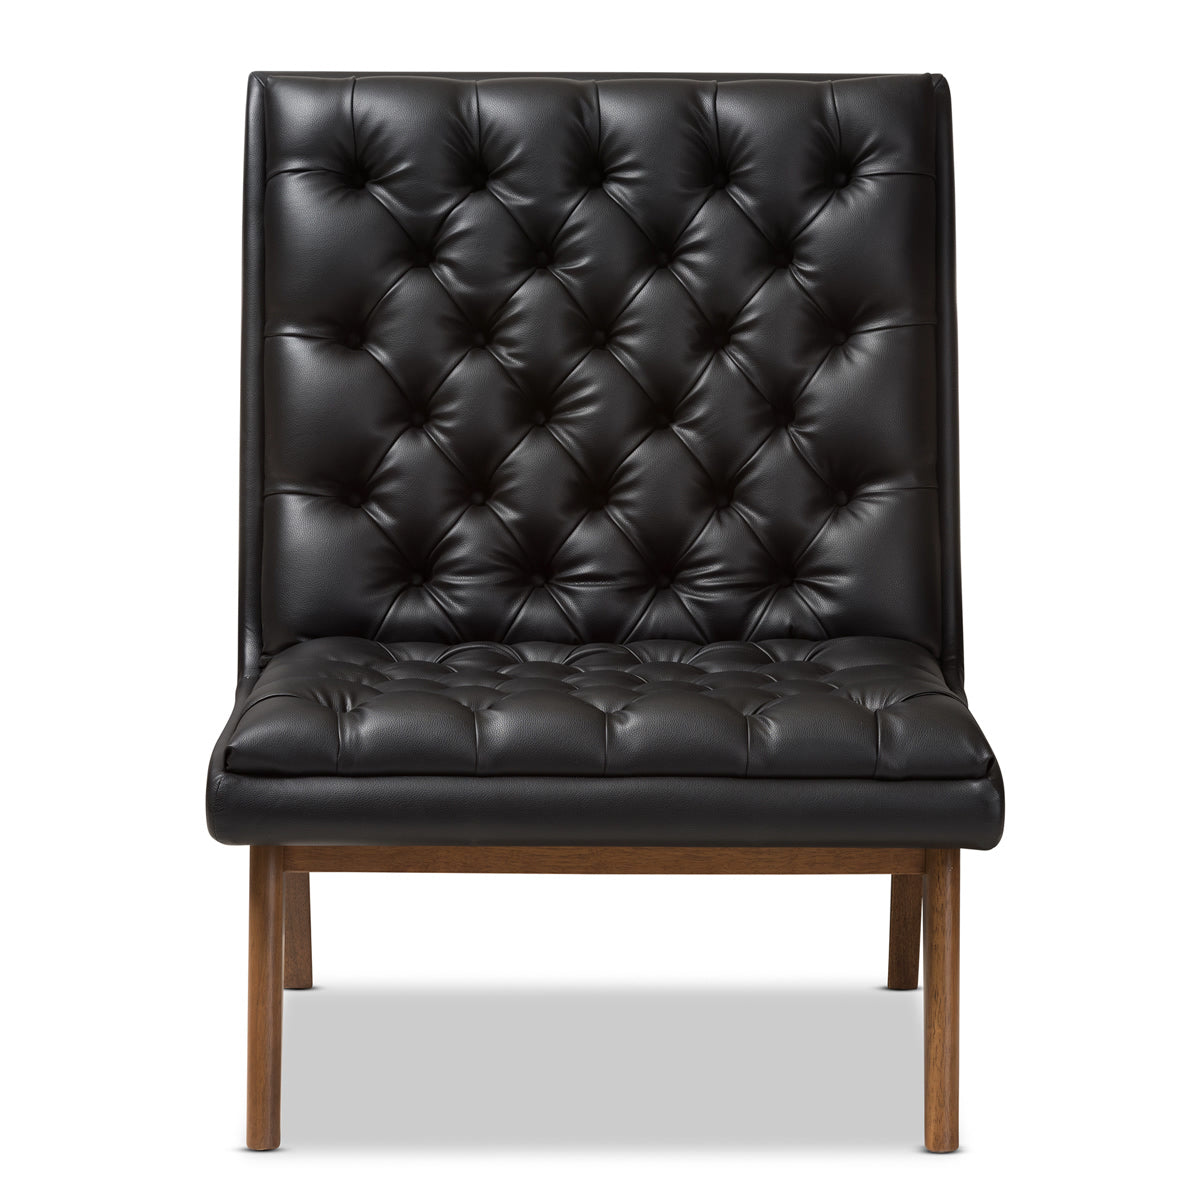 Baxton Studio Annetha Mid-Century Modern Black Faux Leather Upholstered Walnut Finished Wood Lounge Chair Baxton Studio-chairs-Minimal And Modern - 2